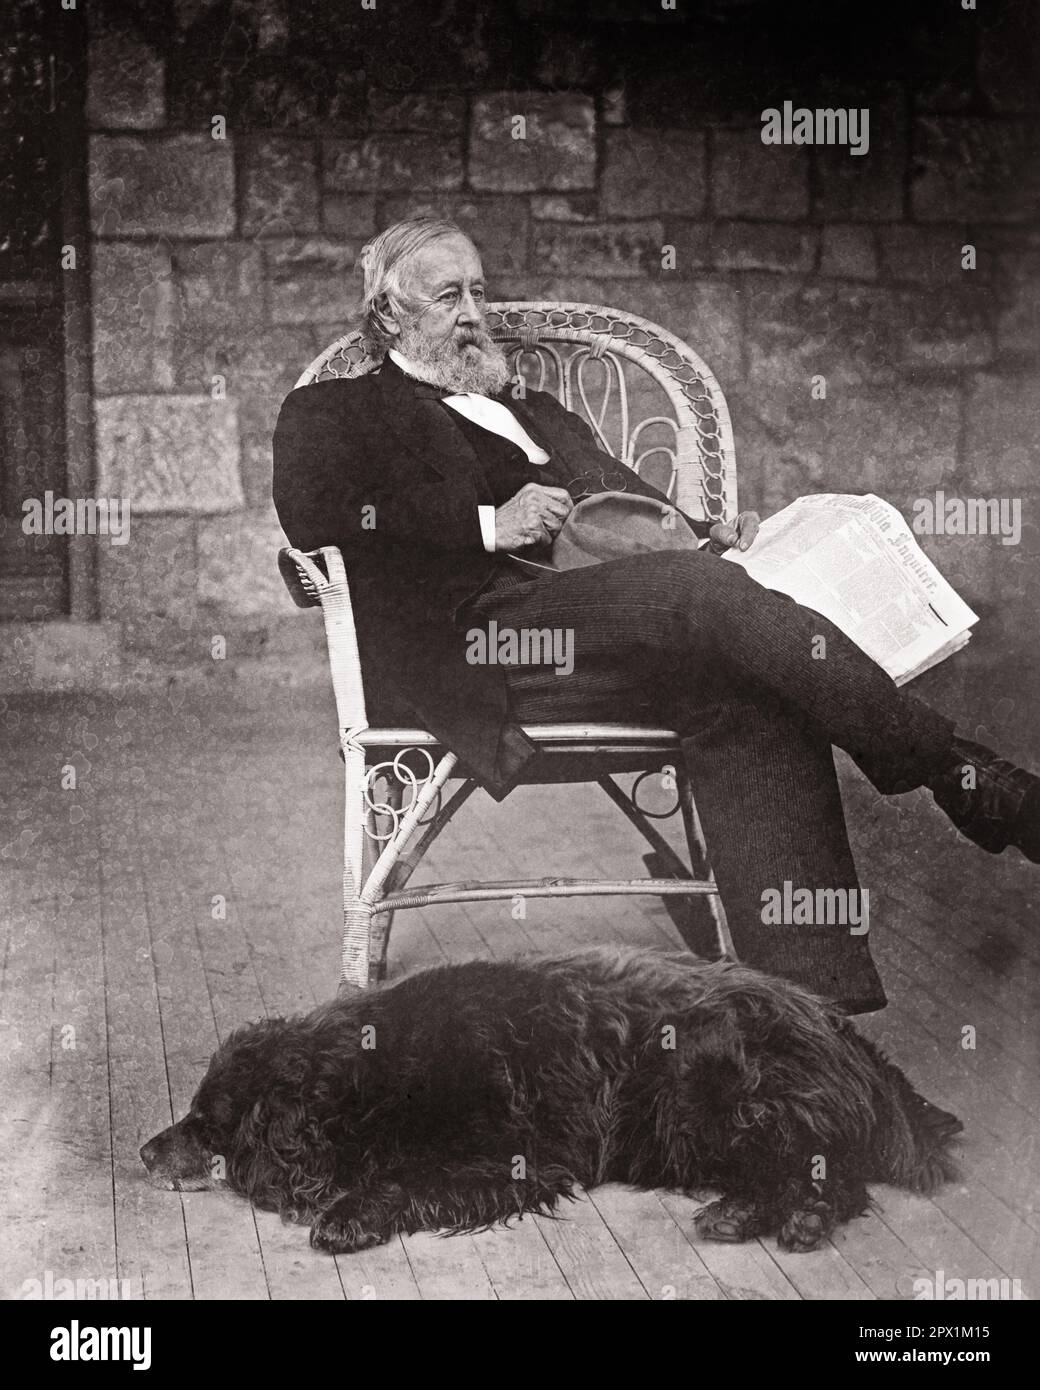 1870s ELDERLY BEARDED MAN SITTING IN WICKER CHAIR ON PORCH OF STONE HOUSE HOLDING A NEWSPAPER A BLACK DOG LYING AT HIS FEET - o3789 HAR001 HARS LIFESTYLE ELDER HOME LIFE COPY SPACE FULL-LENGTH PERSONS WICKER MALES RETIREMENT MIDDLE-AGED 1800s B&W MIDDLE-AGED MAN RETIREE MAMMALS OLD AGE OLDSTERS OLDSTER HIS LEISURE CANINES EXTERIOR FACIAL HAIR ELDERS POOCH 1870s BEARDED BEARDS CANINE MAMMAL RELAXATION BLACK AND WHITE CAUCASIAN ETHNICITY HAR001 OLD FASHIONED Stock Photo